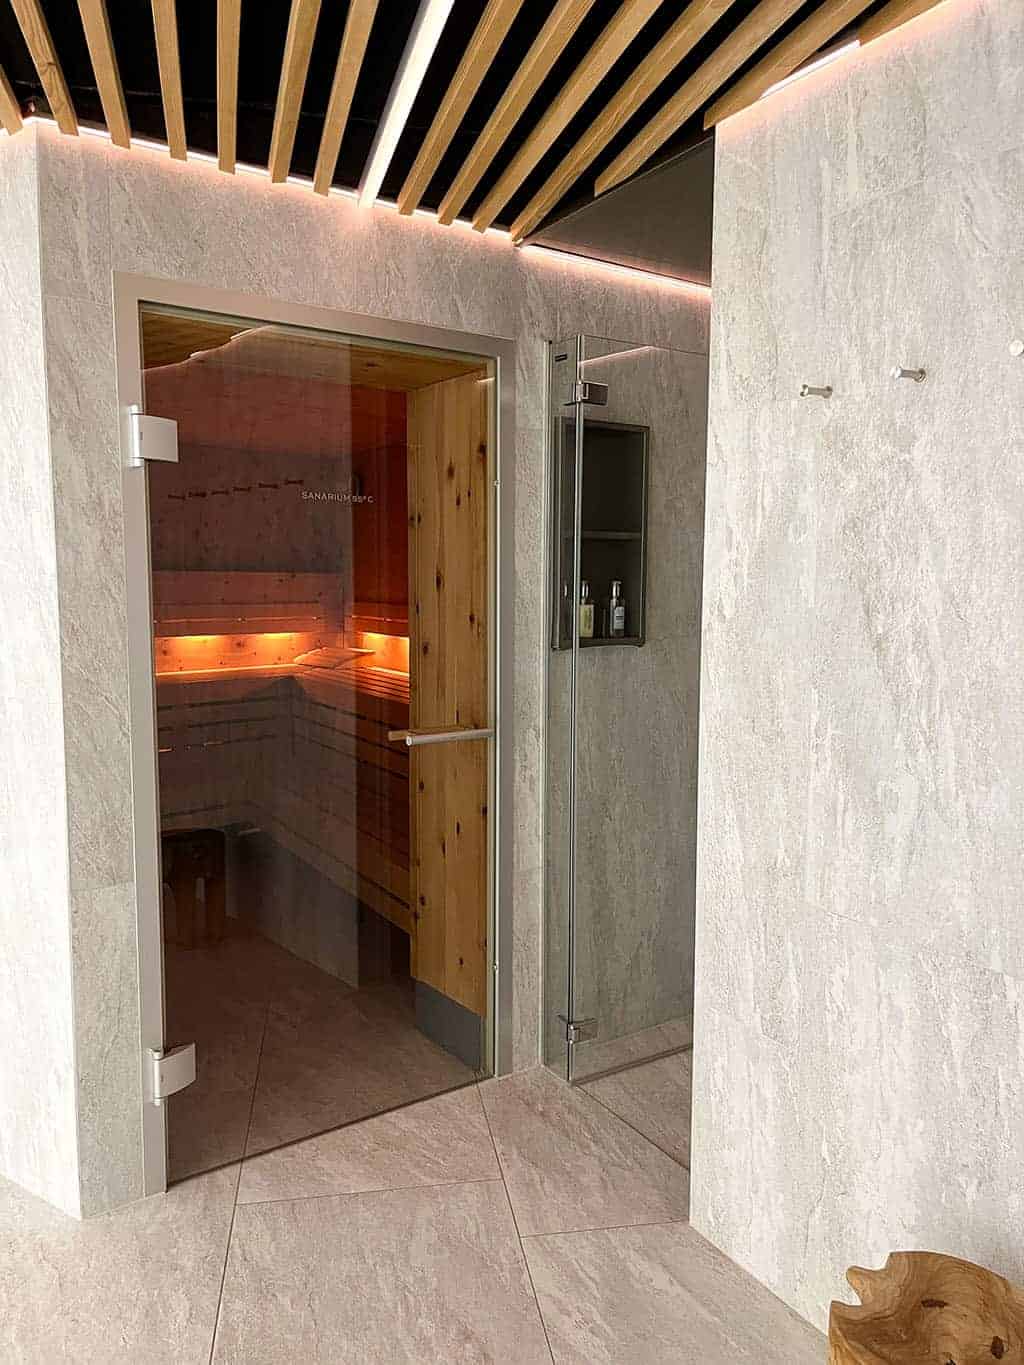 Bergwelt Grindelwald hotel fire and ice spa saunas